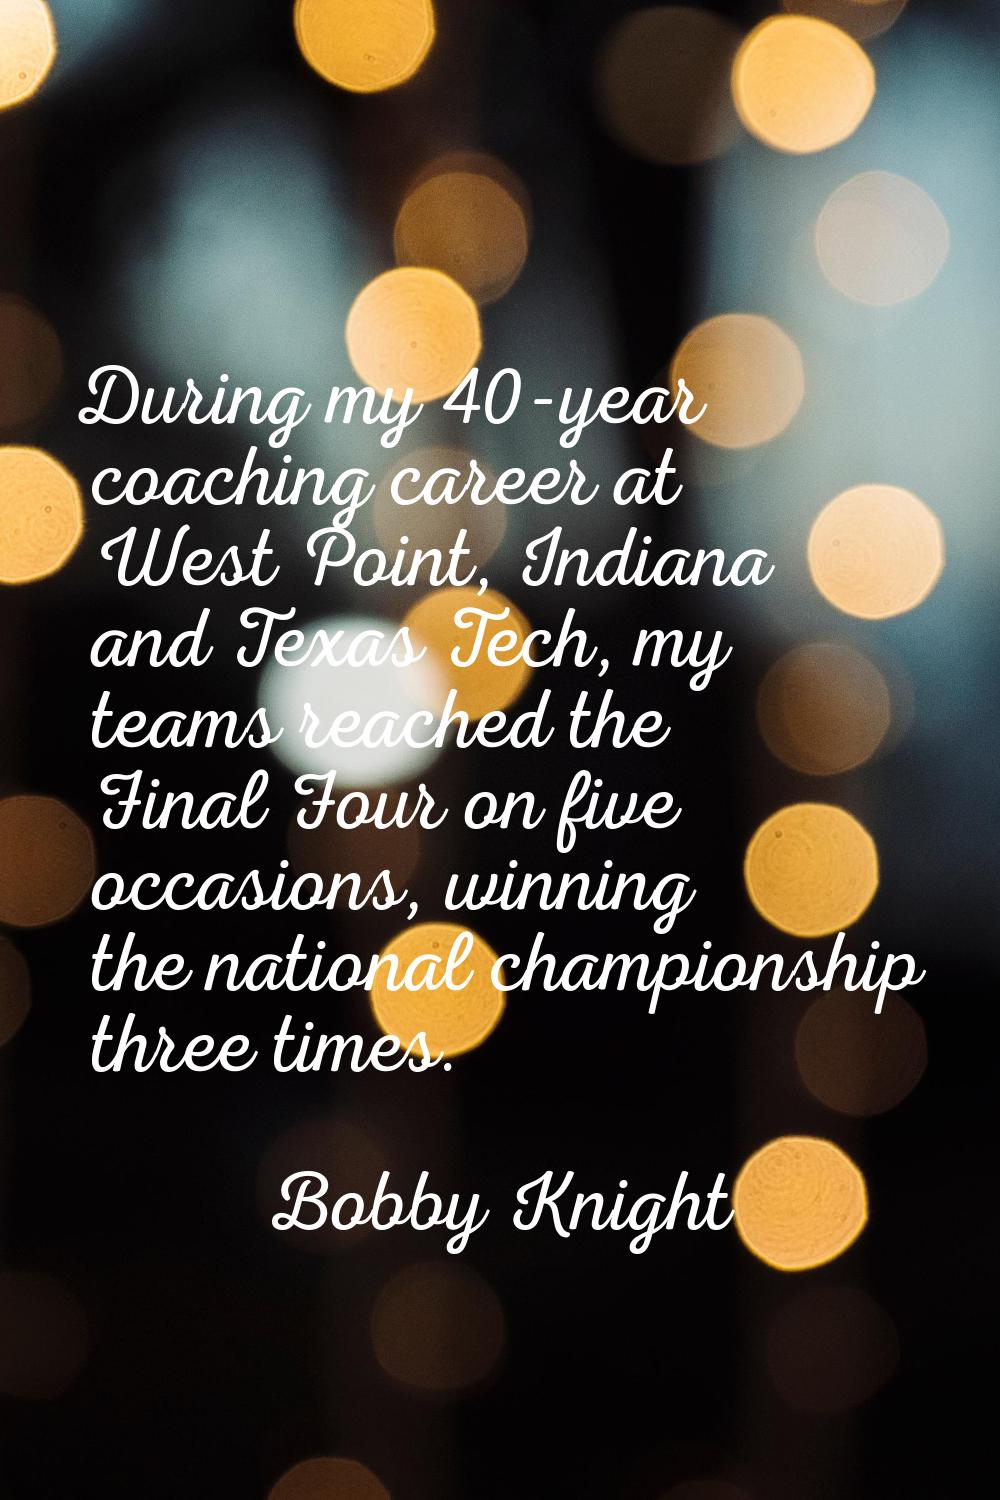 During my 40-year coaching career at West Point, Indiana and Texas Tech, my teams reached the Final